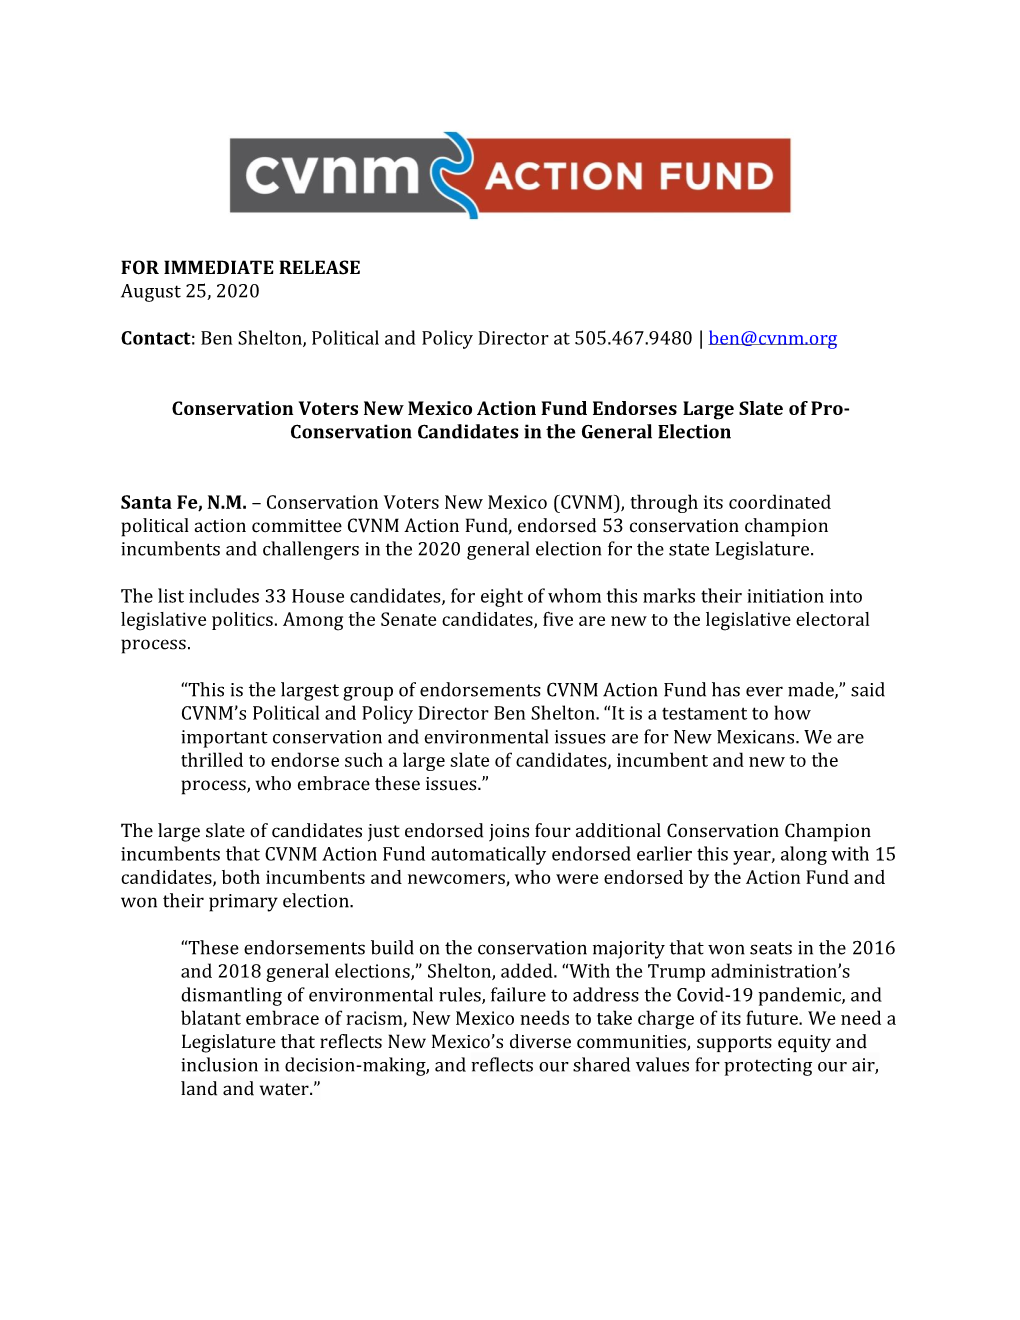 FOR IMMEDIATE RELEASE August 25, 2020 Contact: Ben Shelton, Political and Policy Director at 505.467.9480 | Ben@Cvnm.Org Conserv